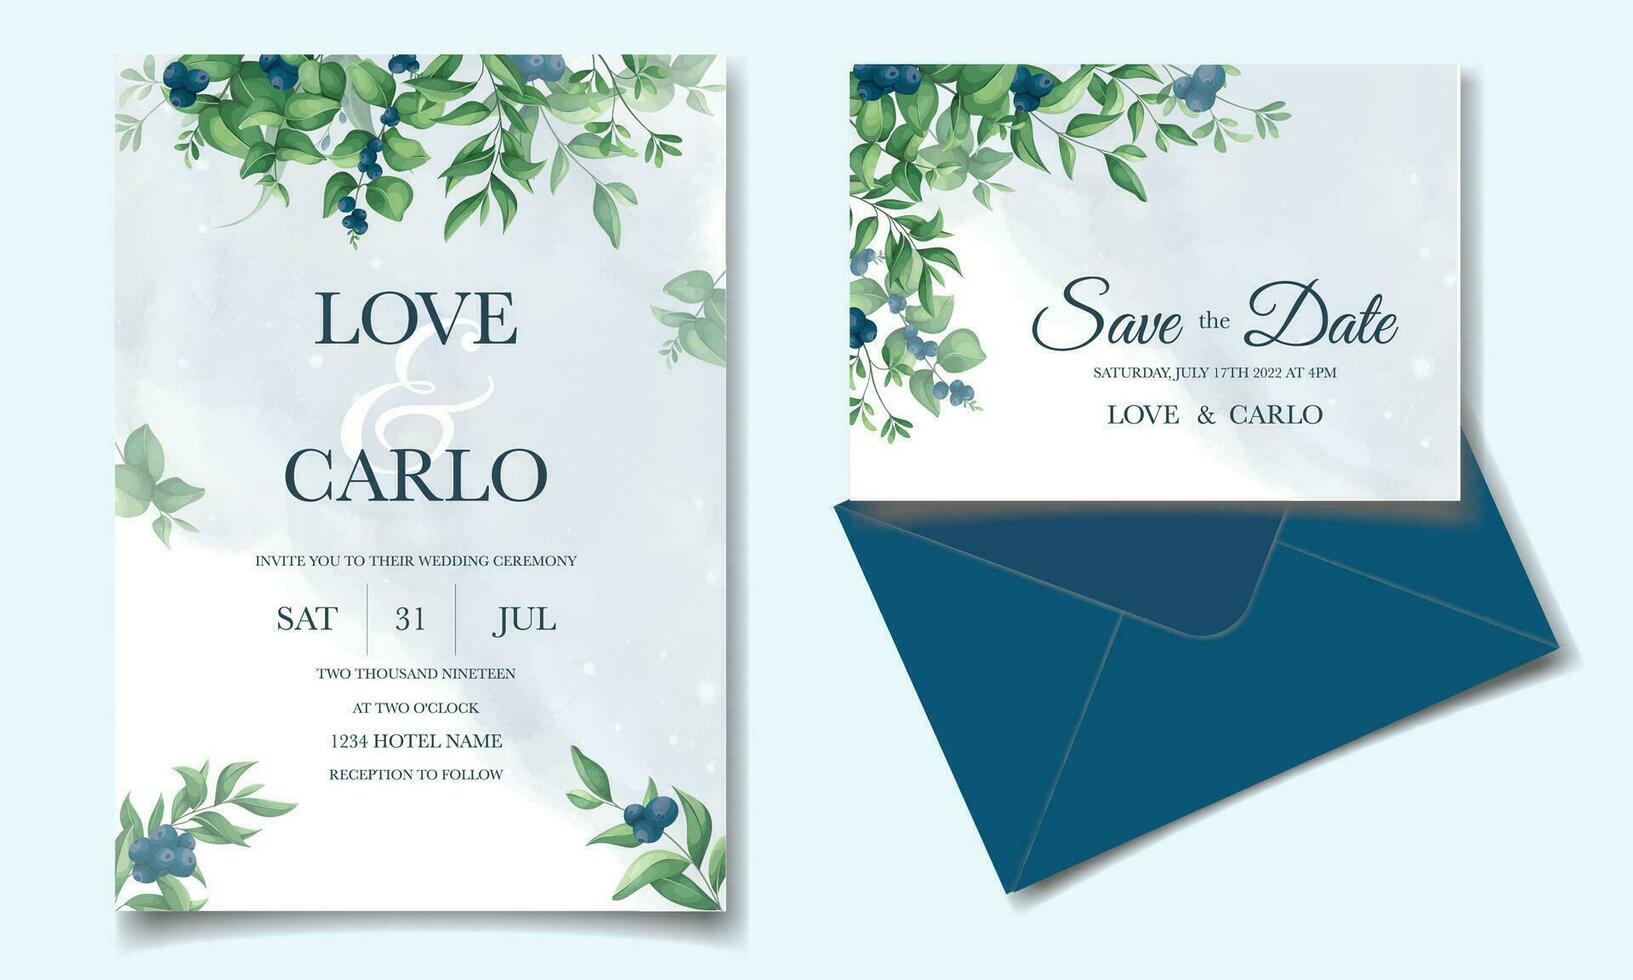 Elegant wedding invitation card with greenery leaves and blueberries vector